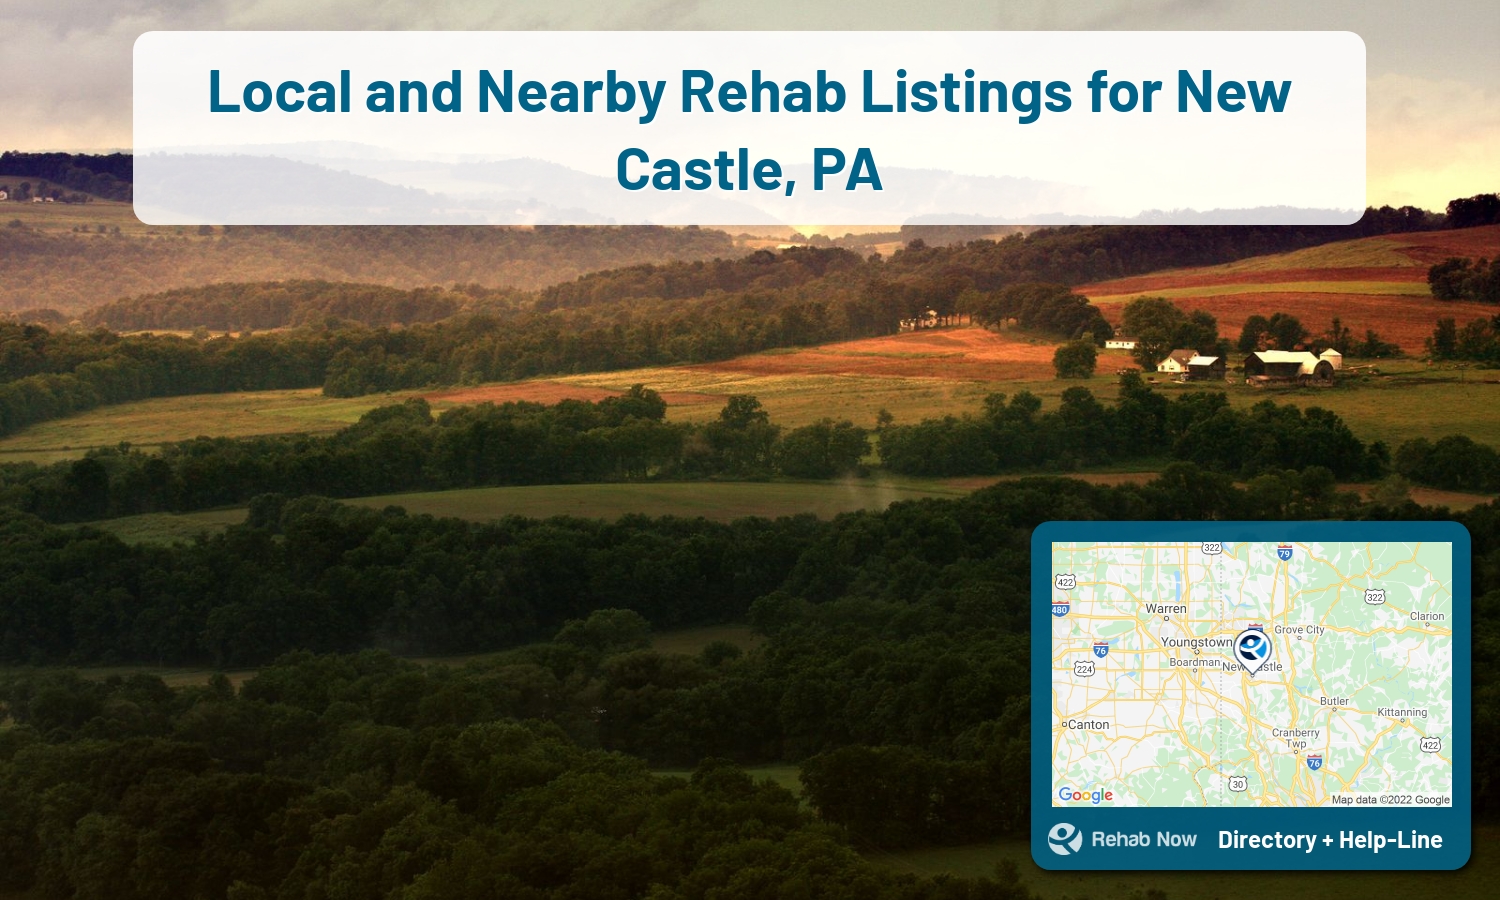 New Castle, PA Treatment Centers. Find drug rehab in New Castle, Pennsylvania, or detox and treatment programs. Get the right help now!